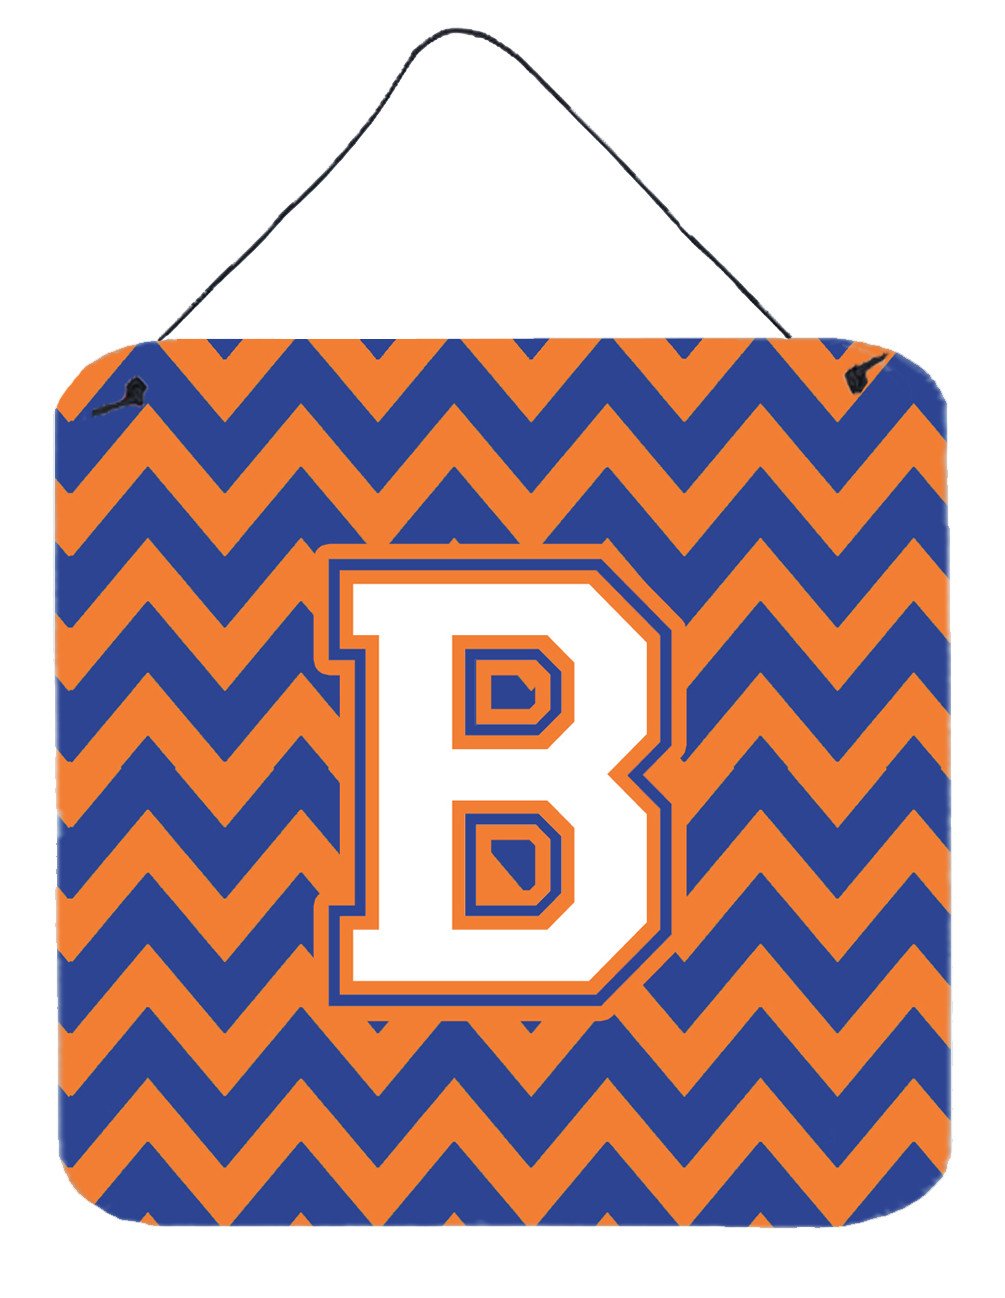 Letter B Chevron Blue and Orange #3 Wall or Door Hanging Prints CJ1060-BDS66 by Caroline's Treasures